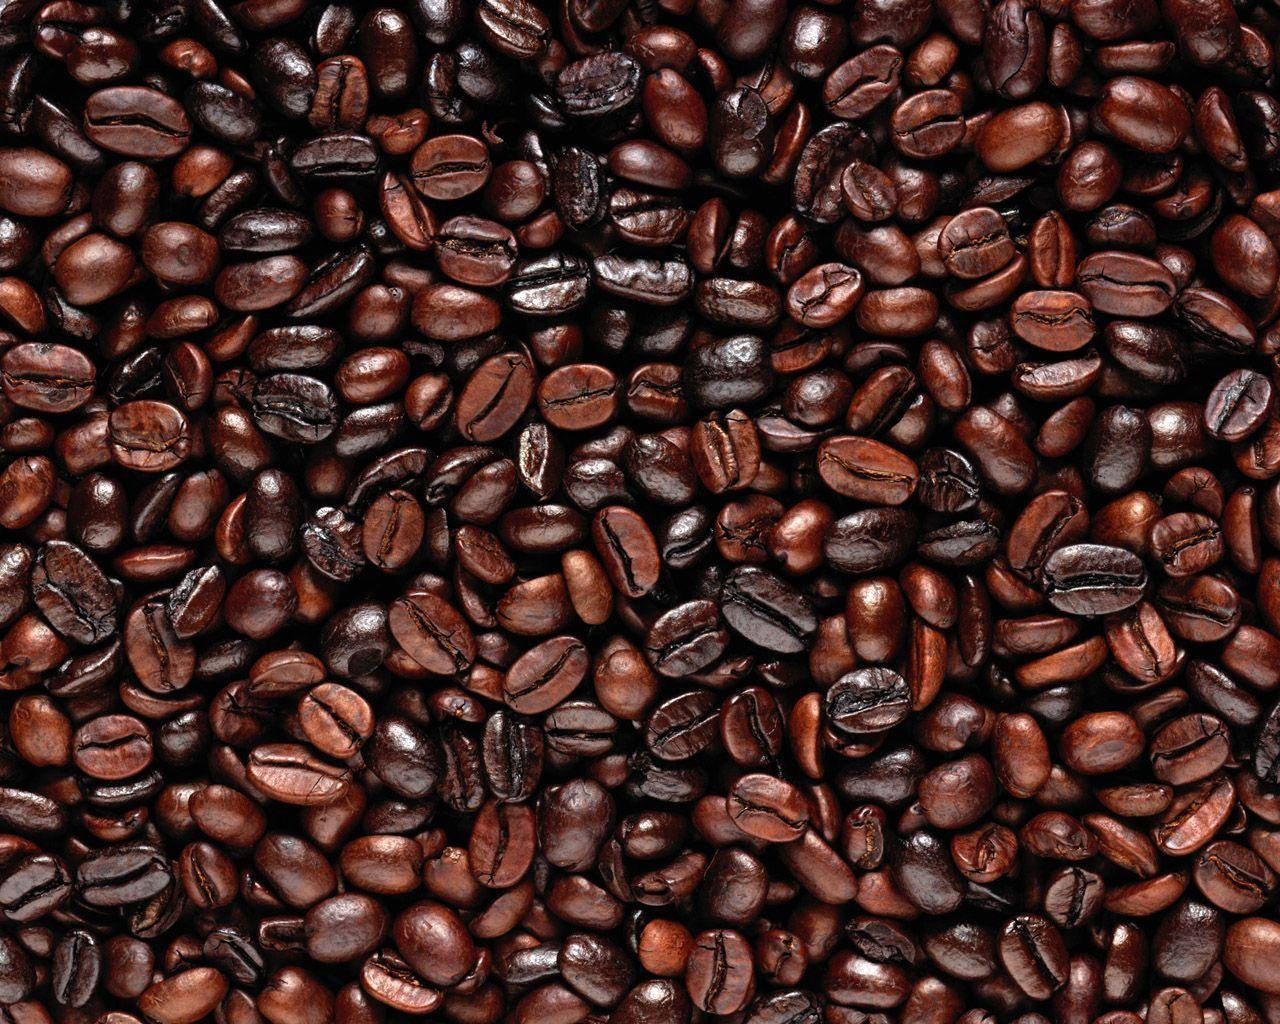 Coffee Beans Background Inspiration Ideas 15440 Decorating Ideas